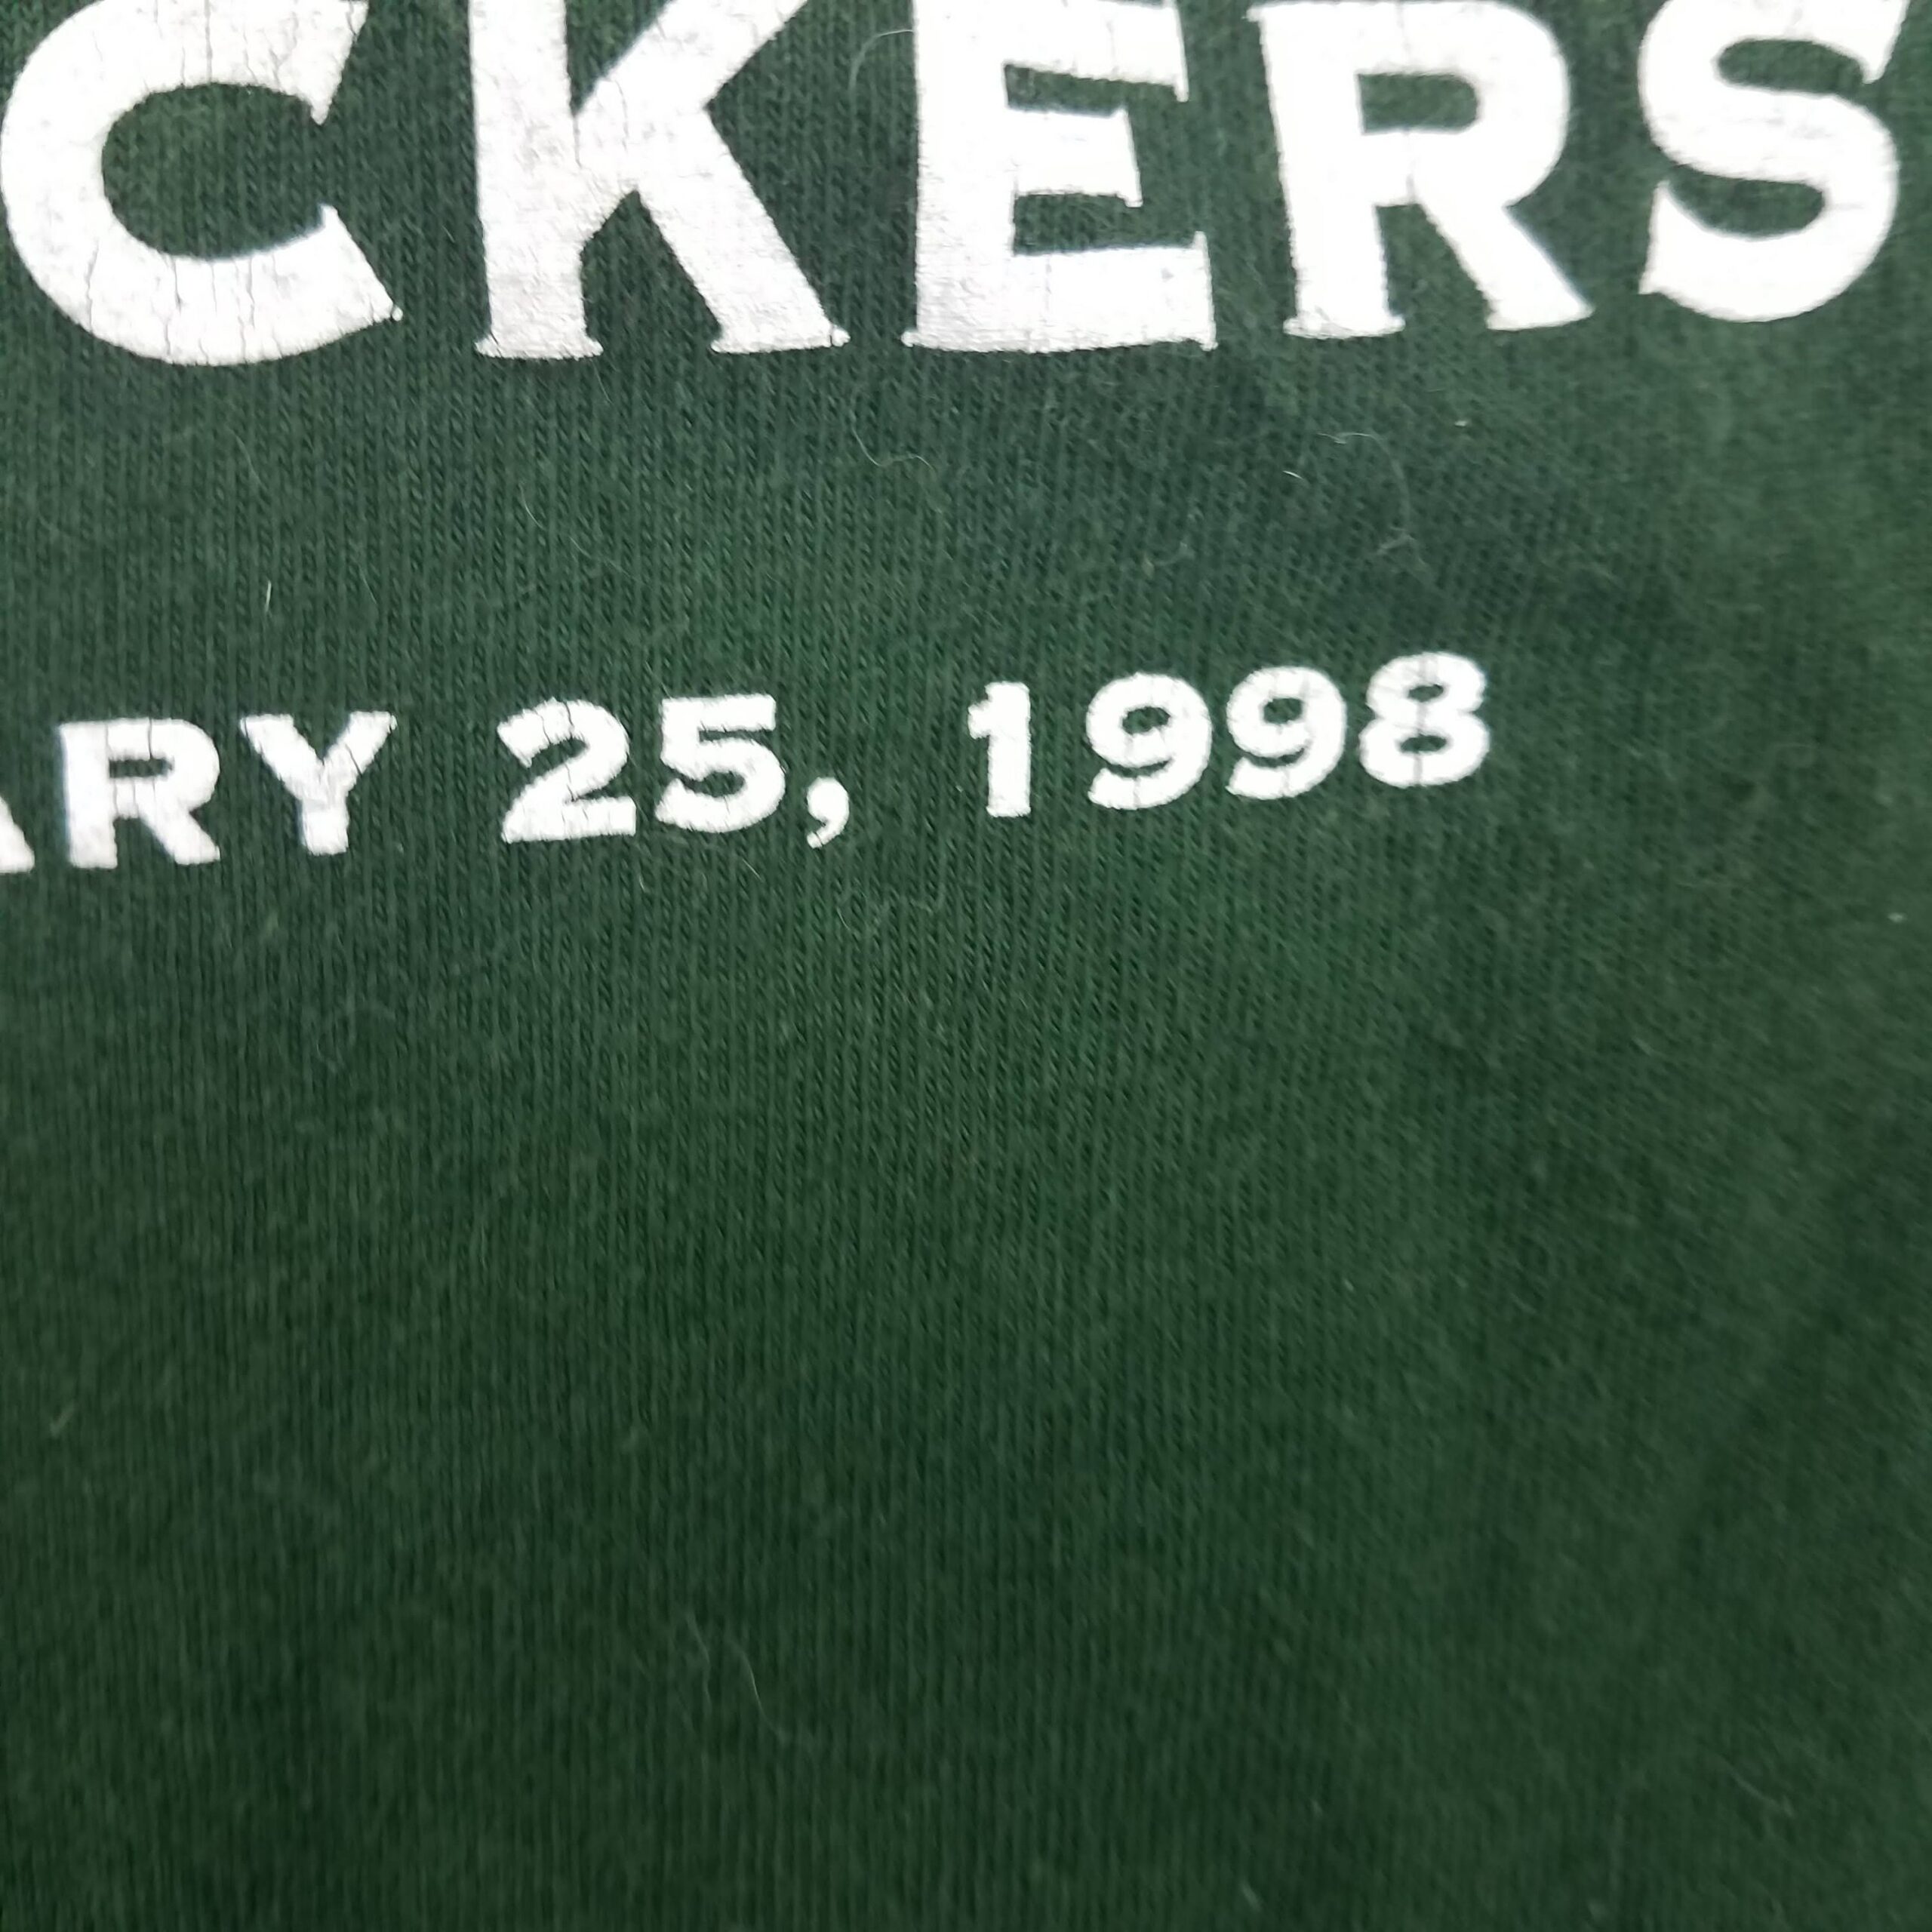 Vintage 1990s Green Bay Packers NFC Champions Super Bowl Shirt